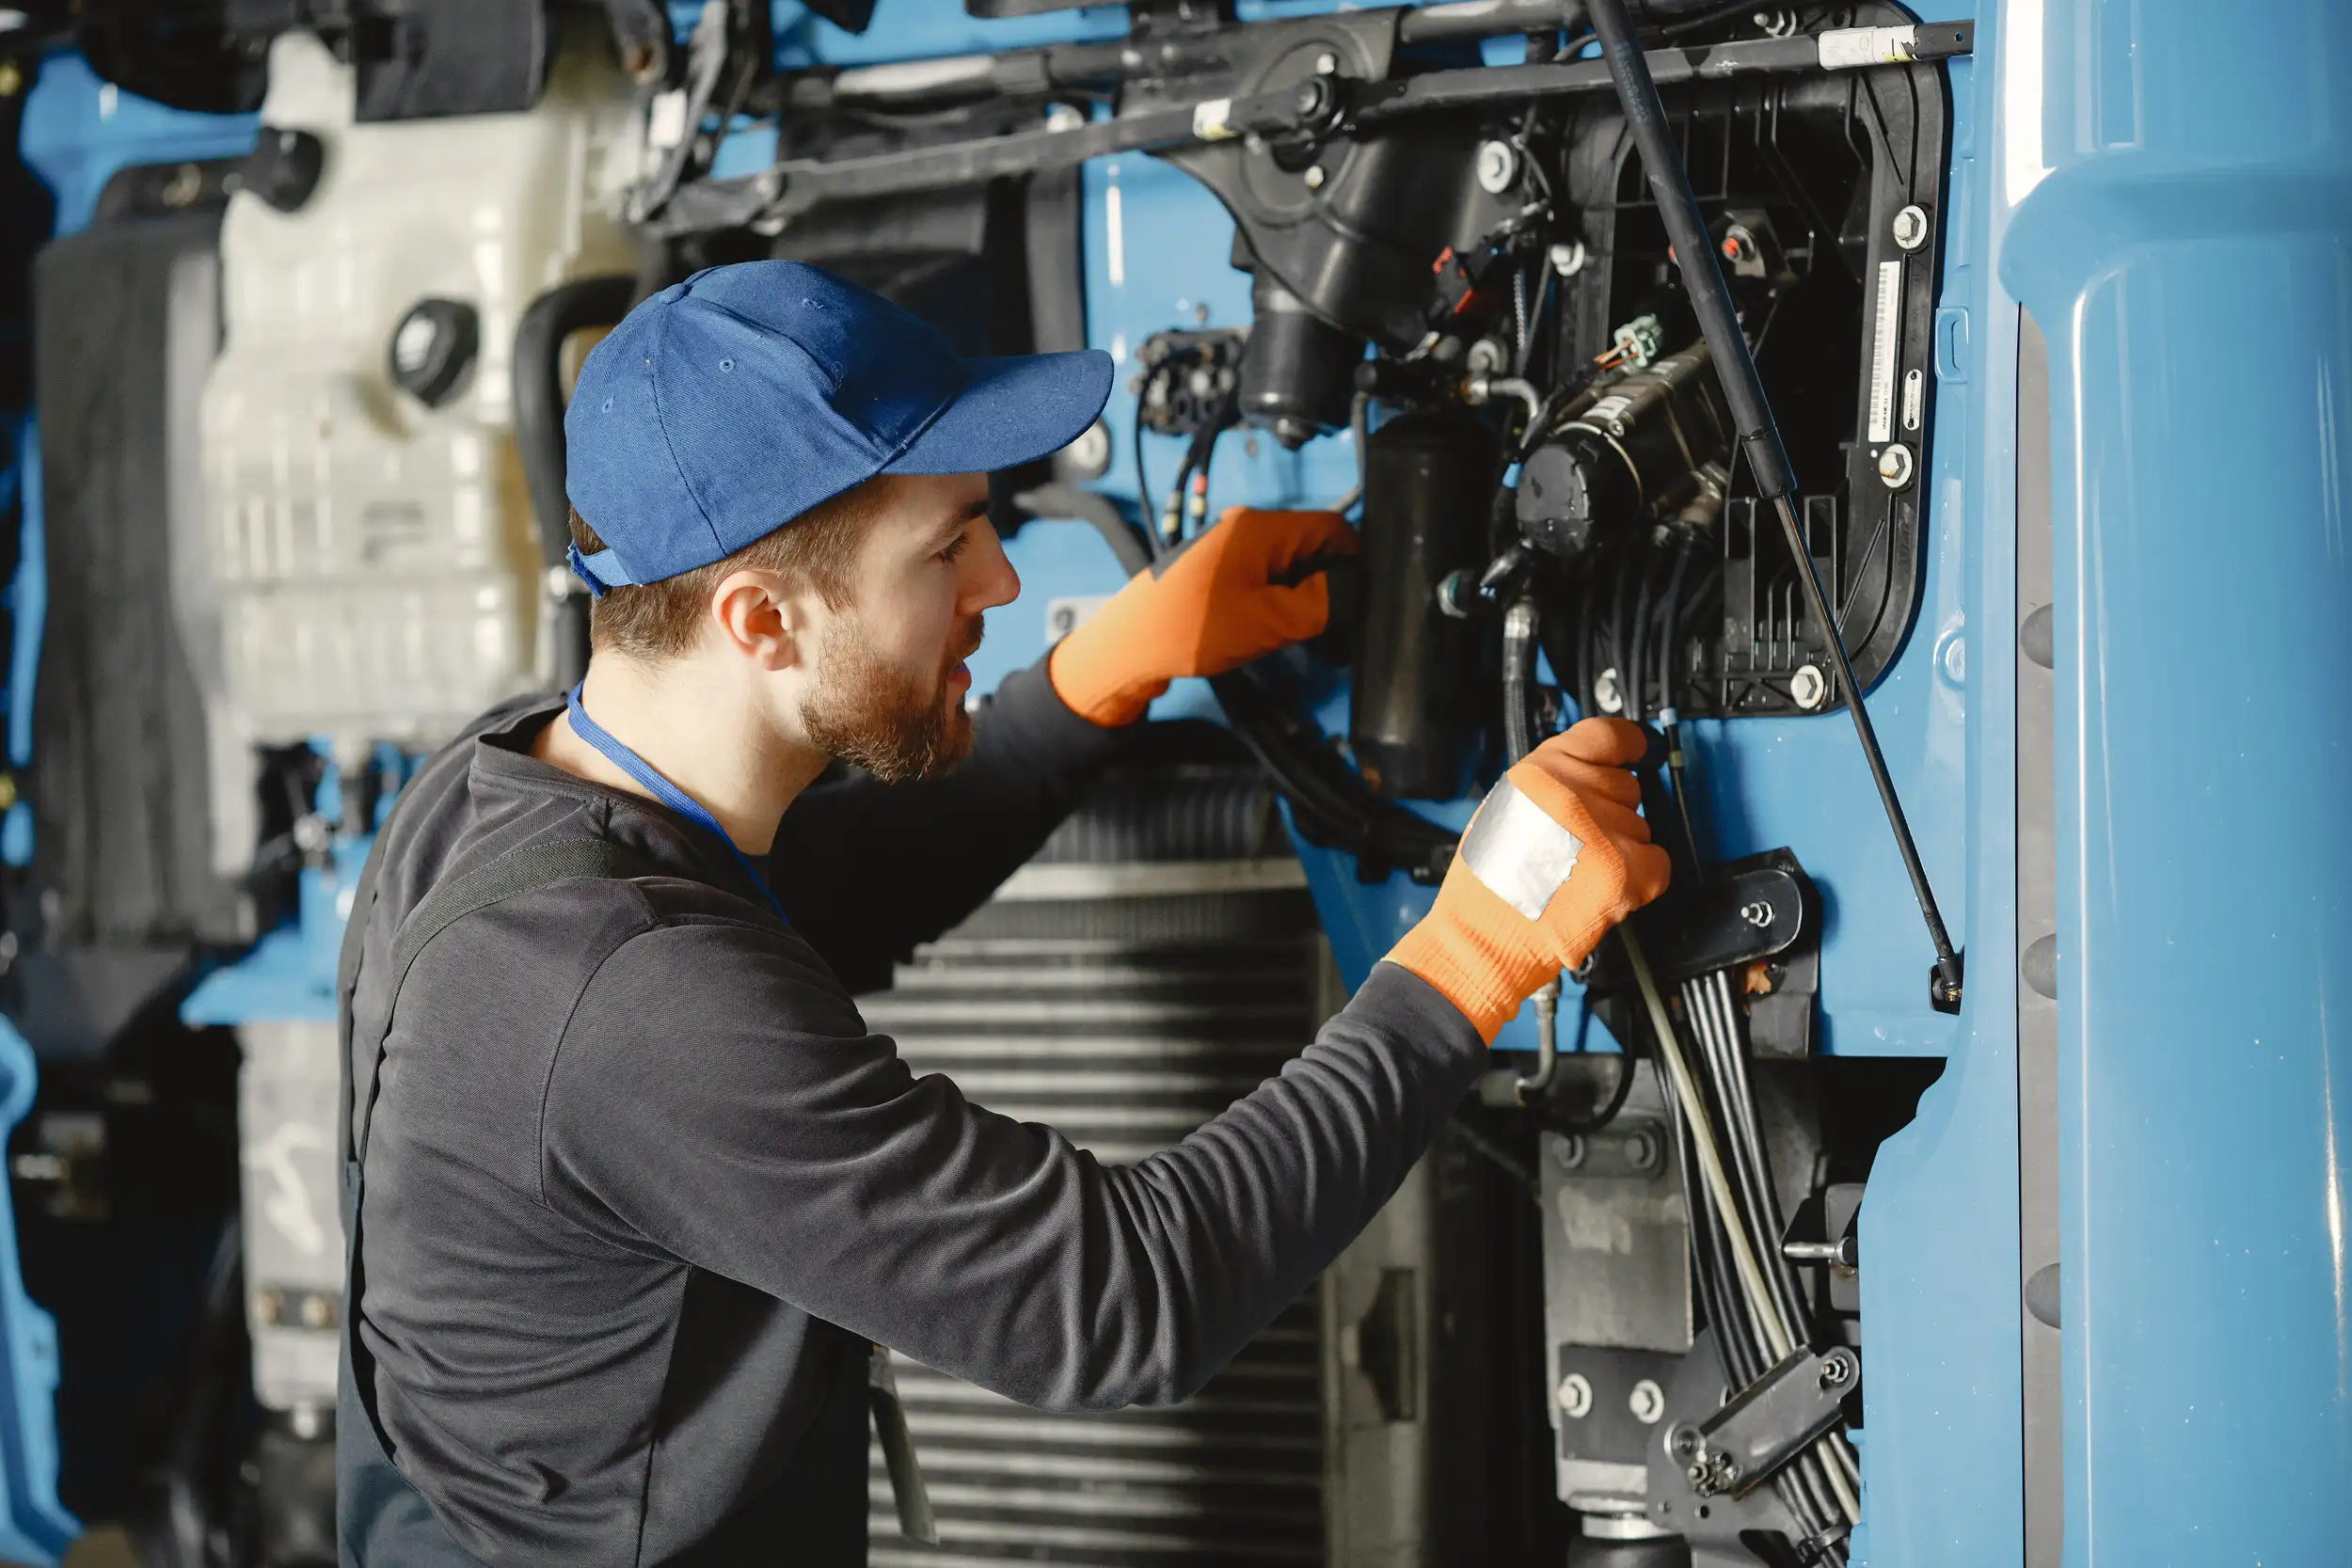 A working mechanic checking the wiring and the condition of a trailer truck.